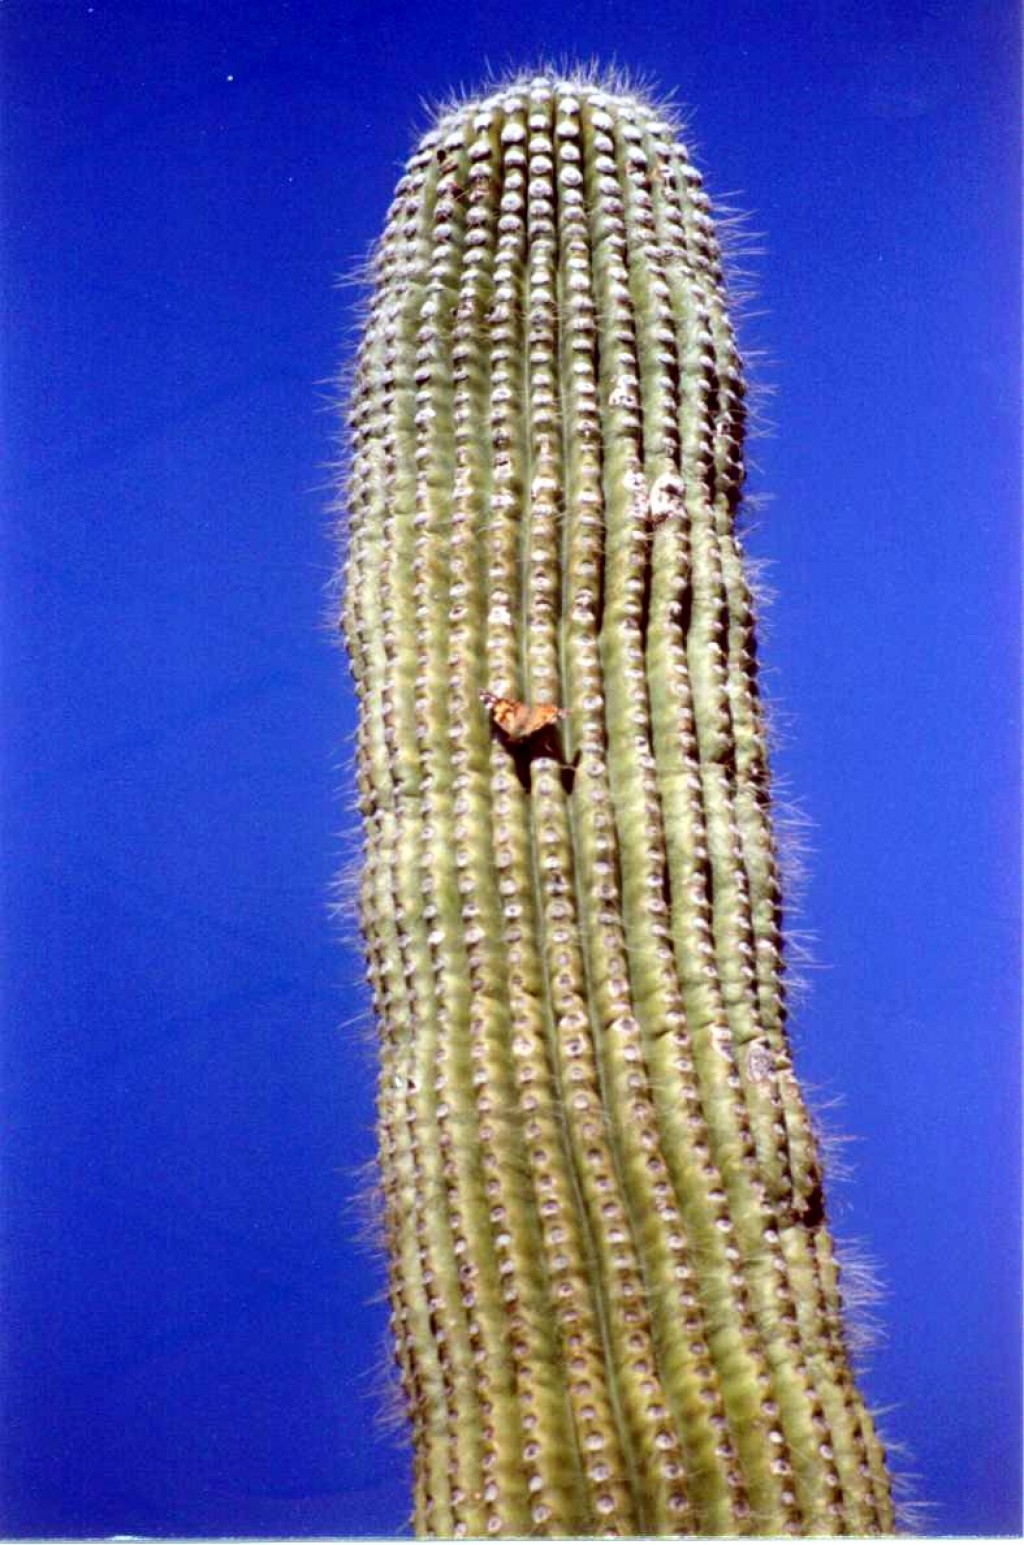 The cacti support a lot of the desert's wildlife.